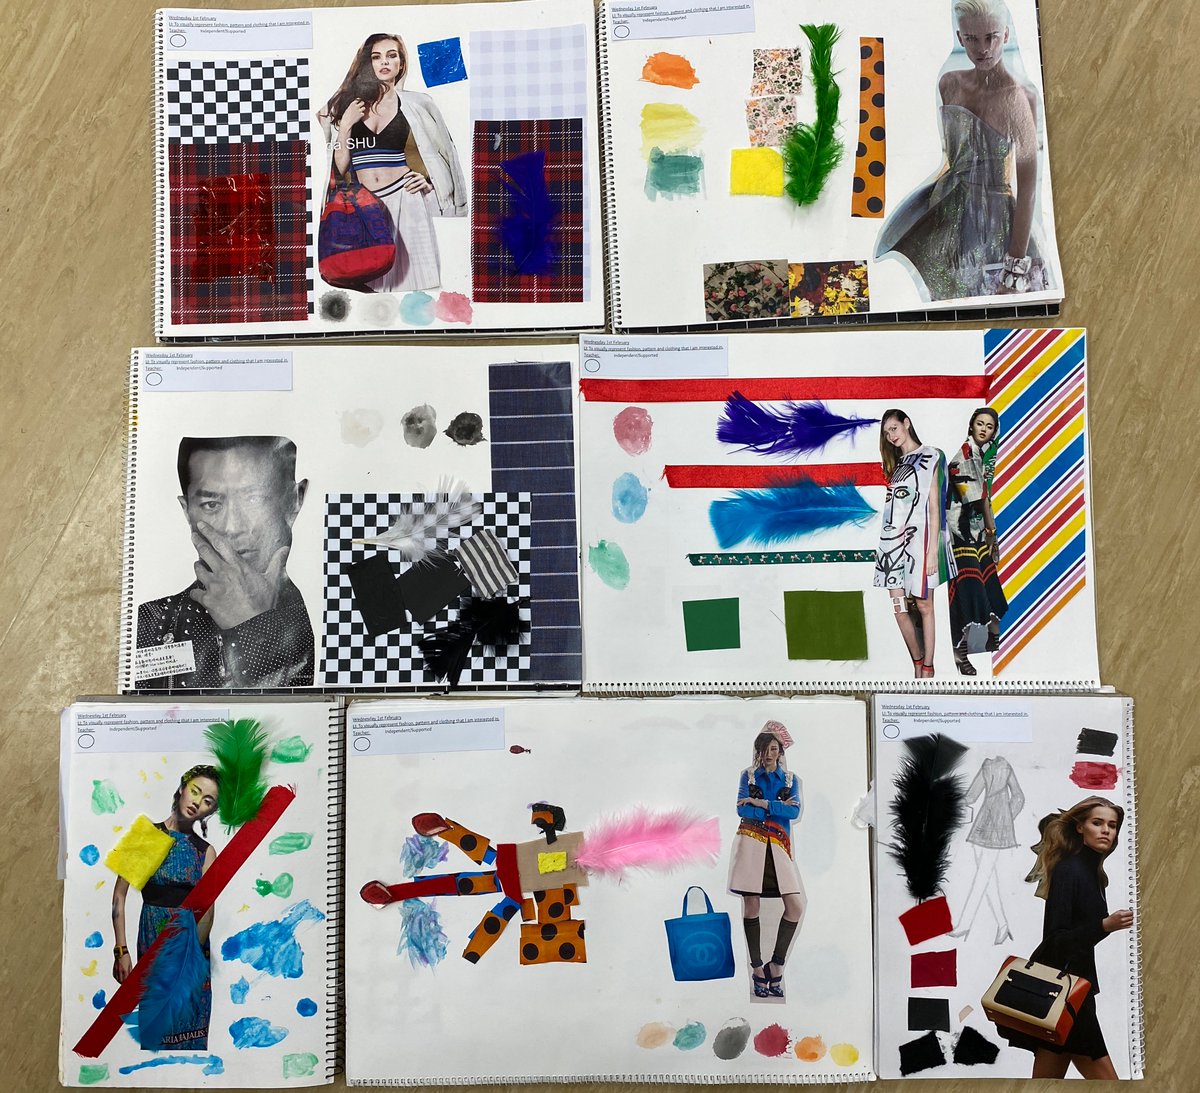 The children in SBCE created mixed media mood boards to show their unique styles and personalities, as part of our fashion topic. @anfield_schhk #InternationalSchoolsHK #HongKongSchools #SEN #KS2art #artsed